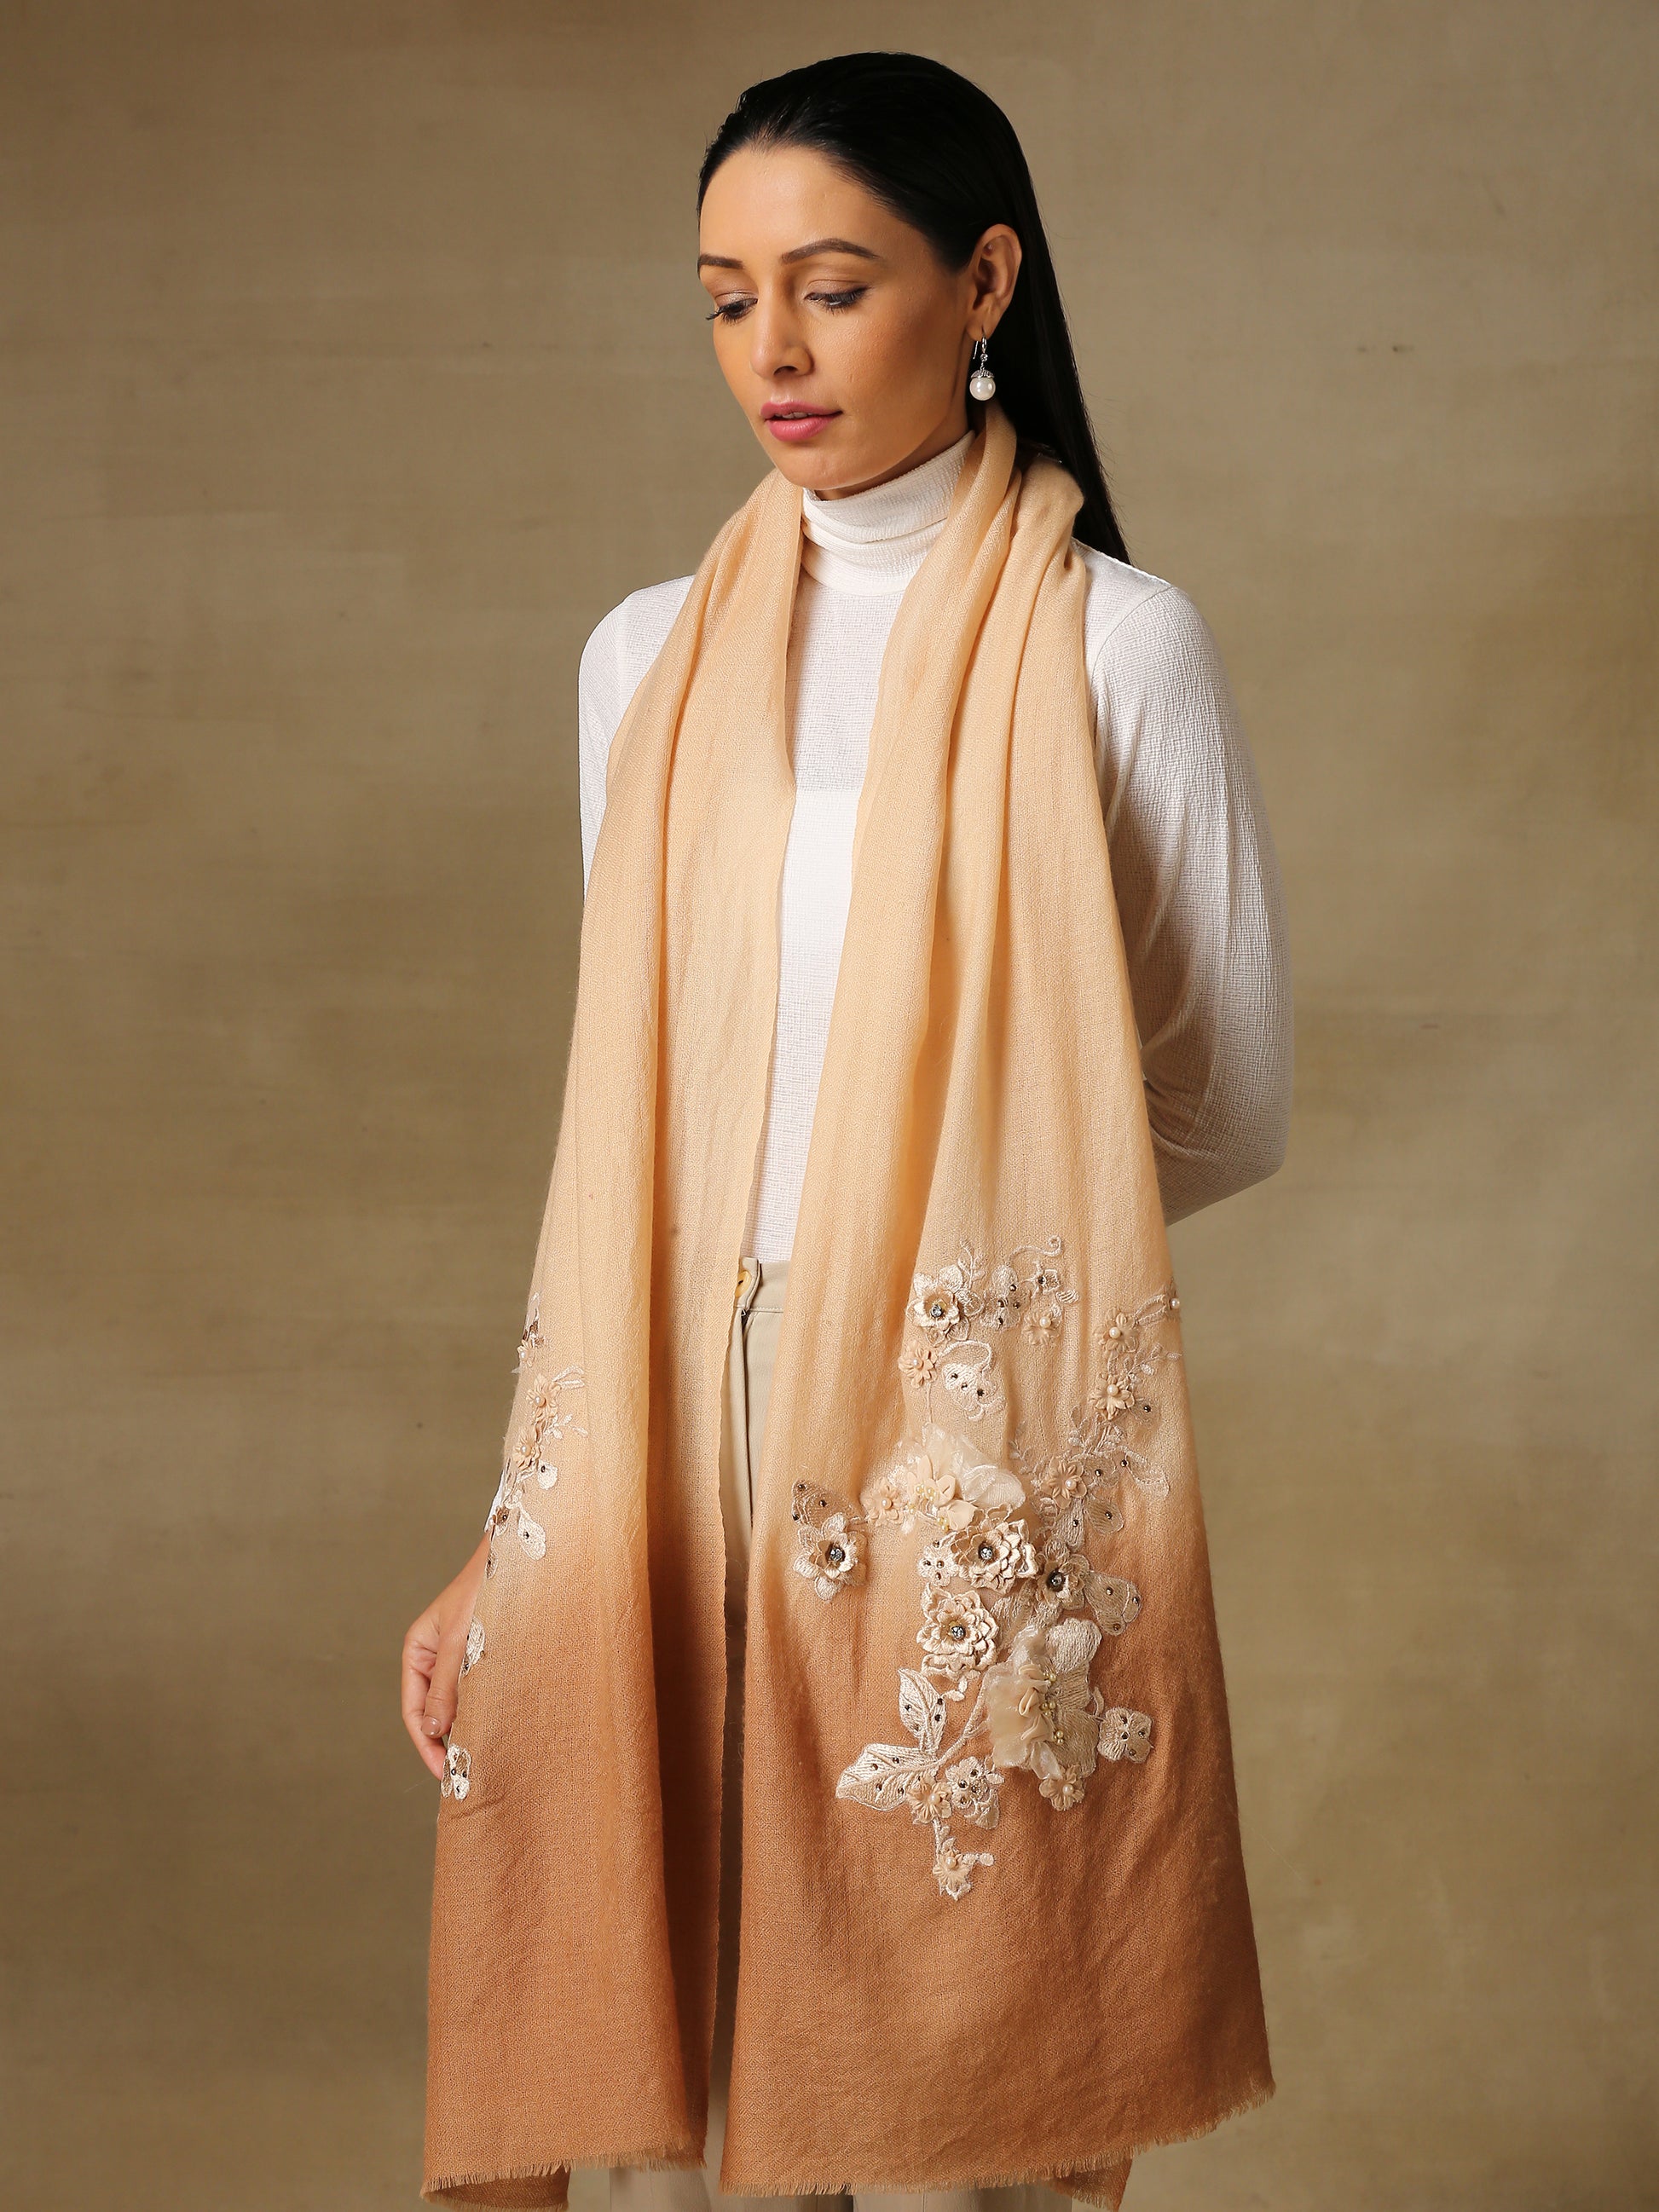 Model is wearing a pashmina stole in an ombre of nude and brown is lavishly embellished with floral motifs, made with threadwork, swarovski, pearls, and applique. This stole is from the Elements of spring collection.  